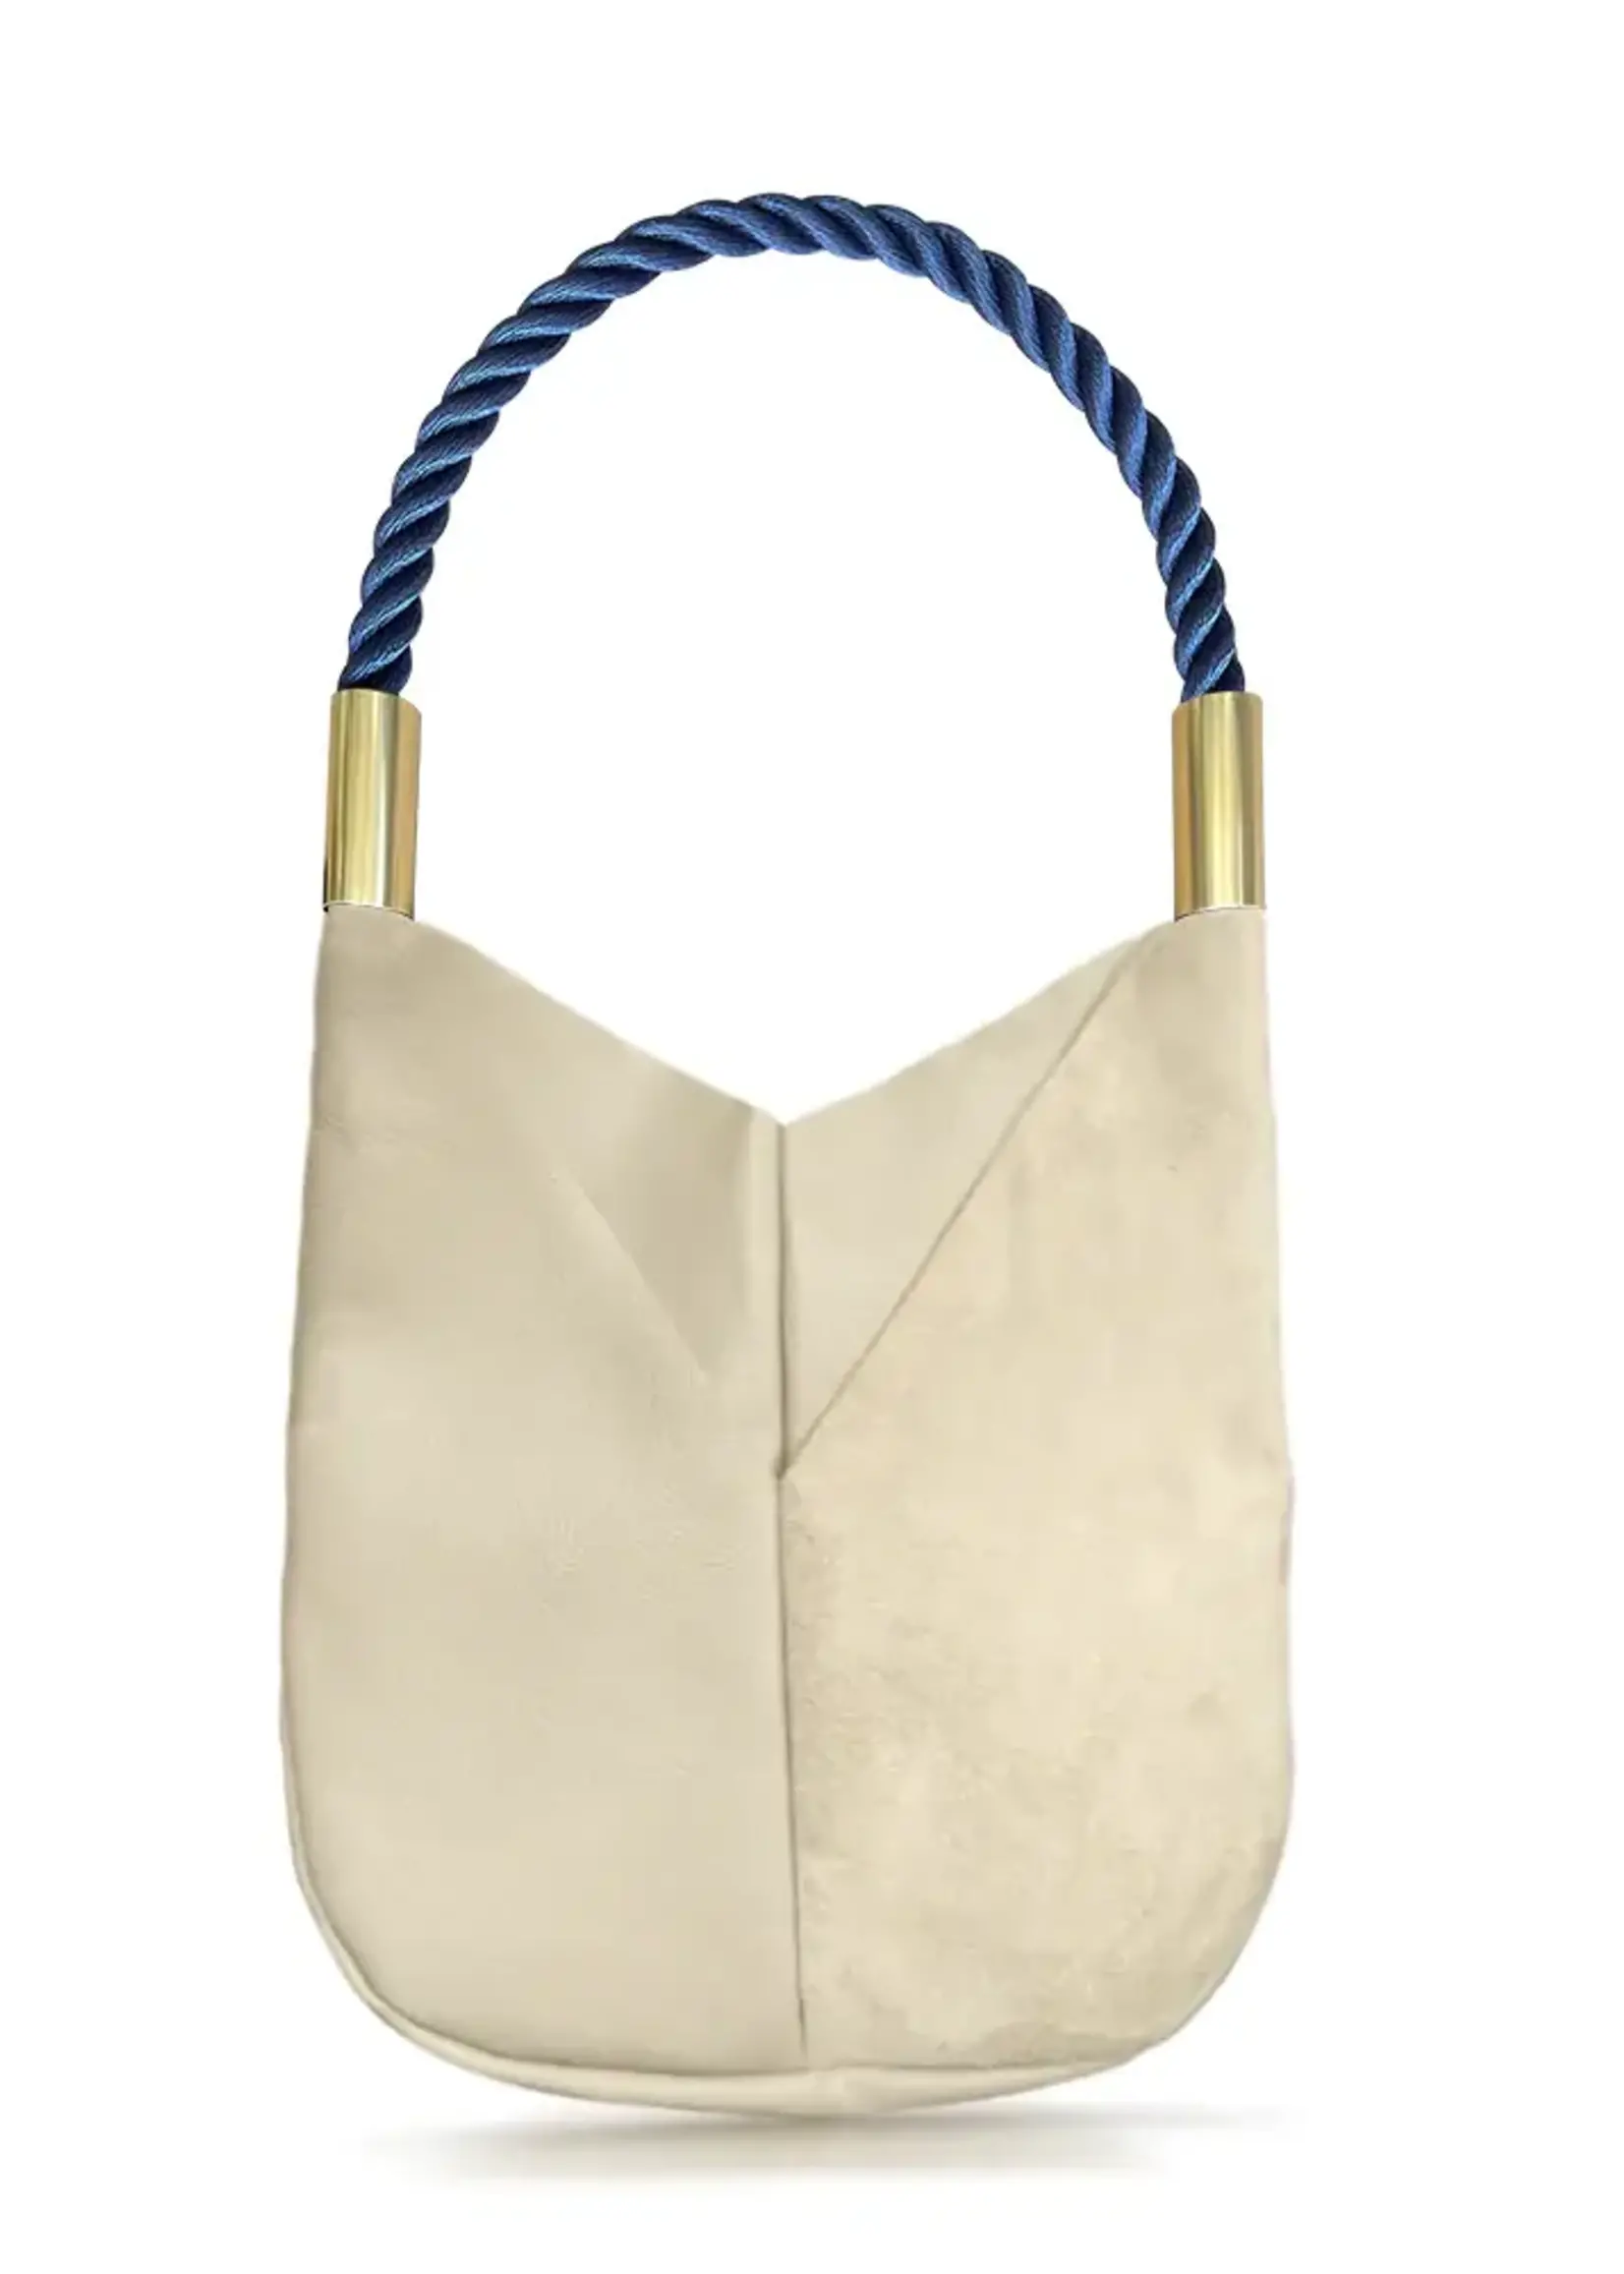 Wildwood Oyster Co. Driftwood Beige Leather Original Tote